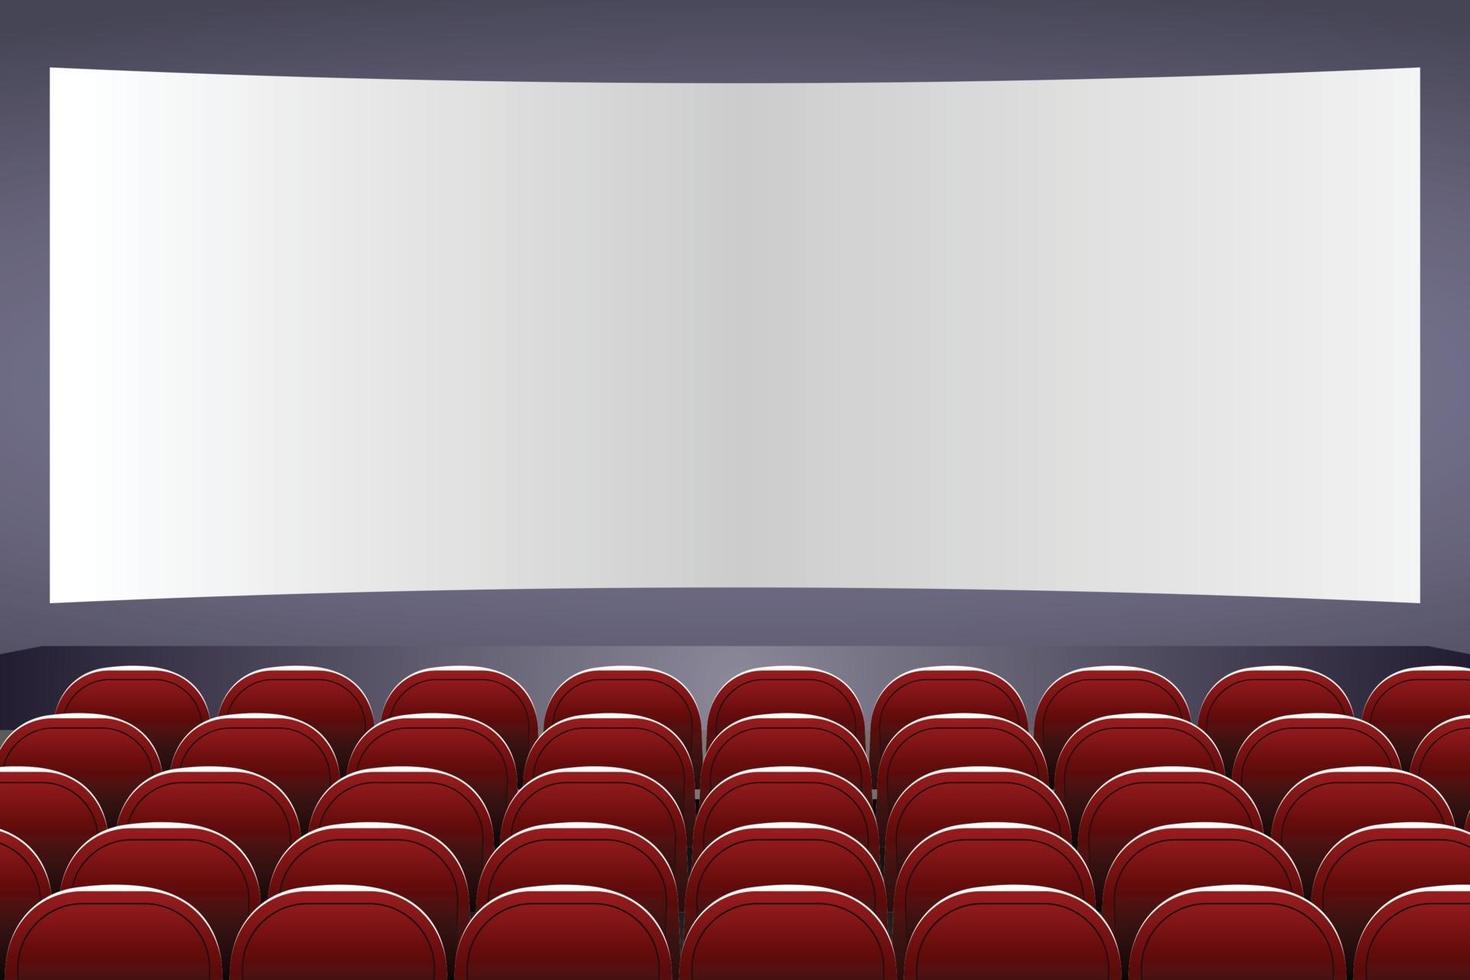 Cinema auditorium with screen and red seats vector